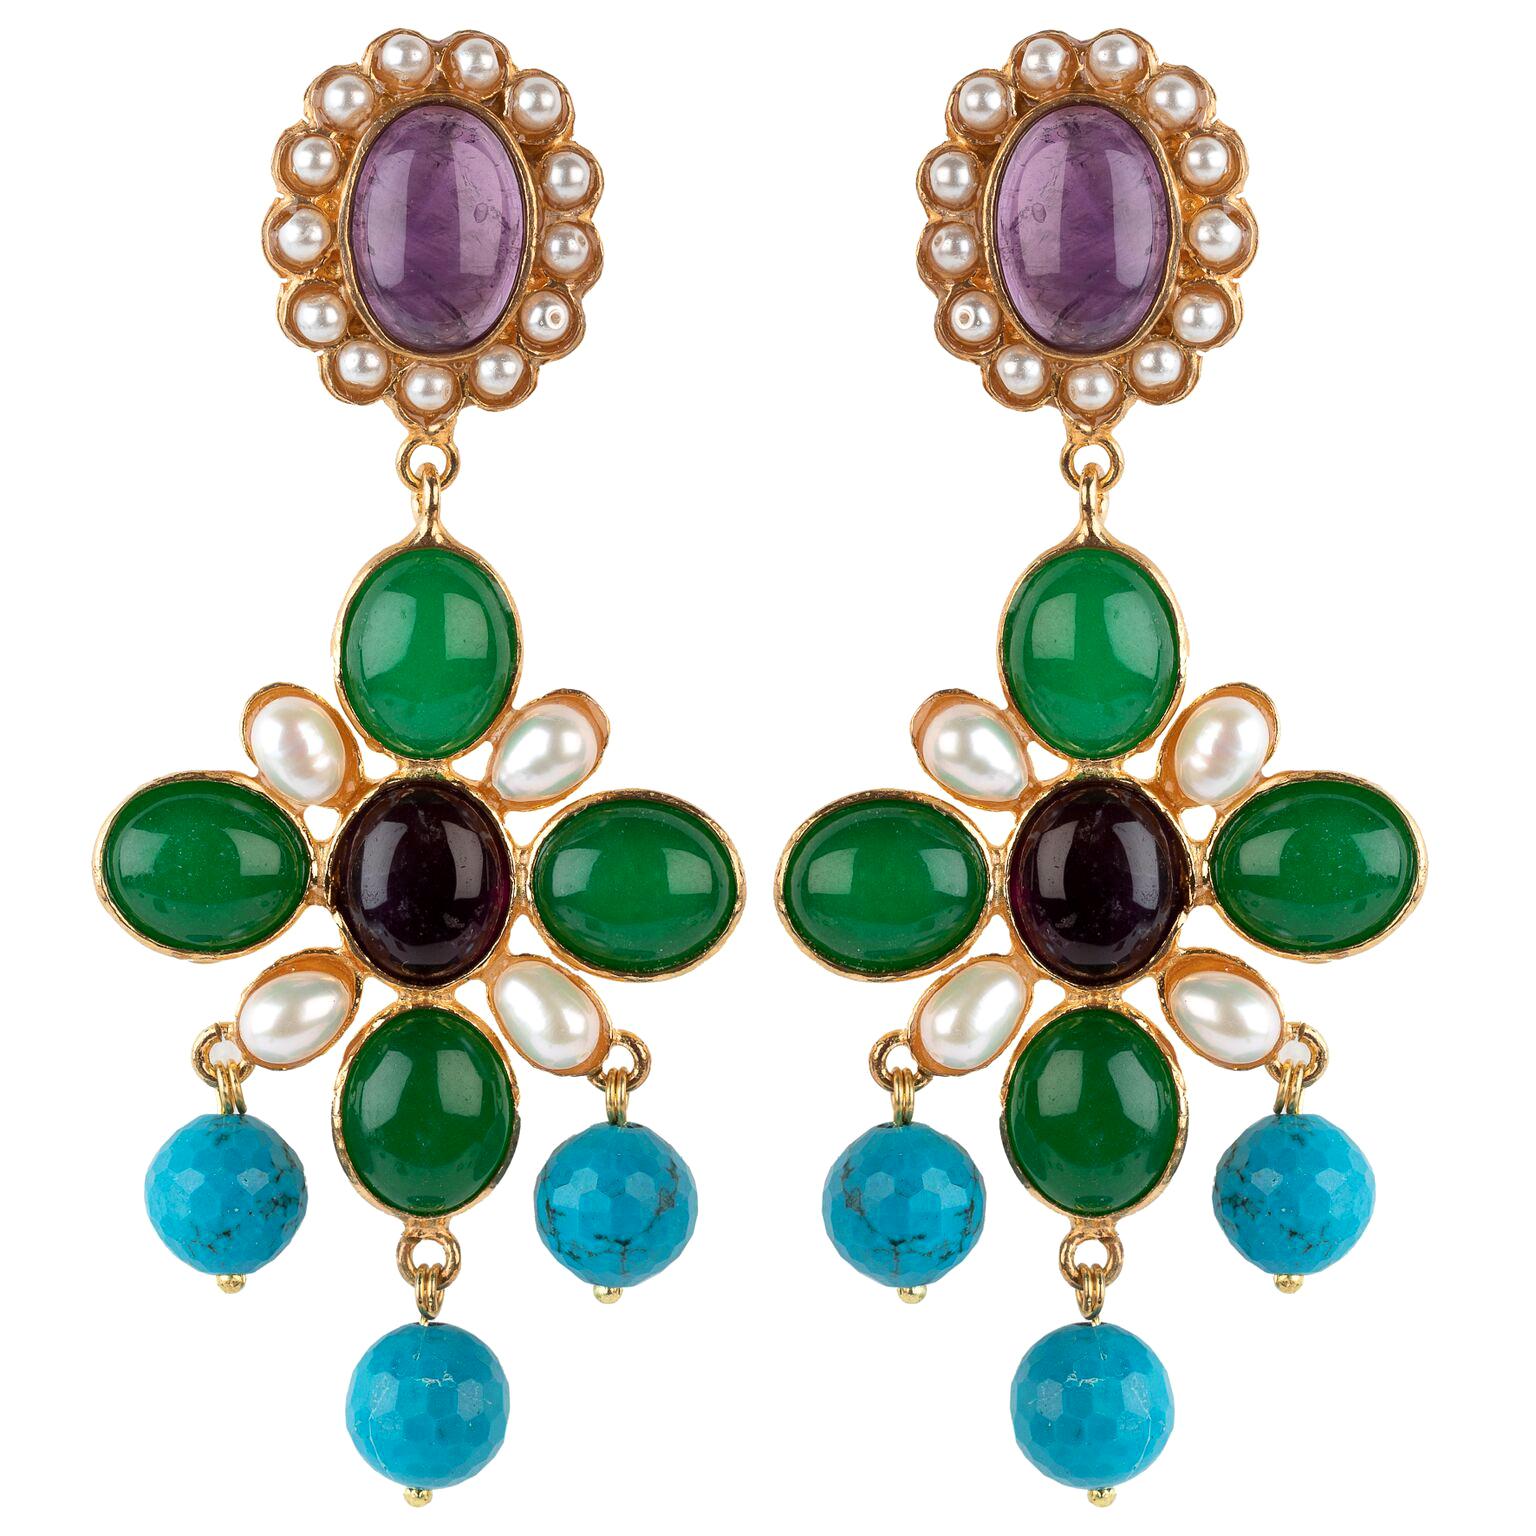 Christie Nicolaides Earrings in Agate with Fresh Water Pearls For Sale